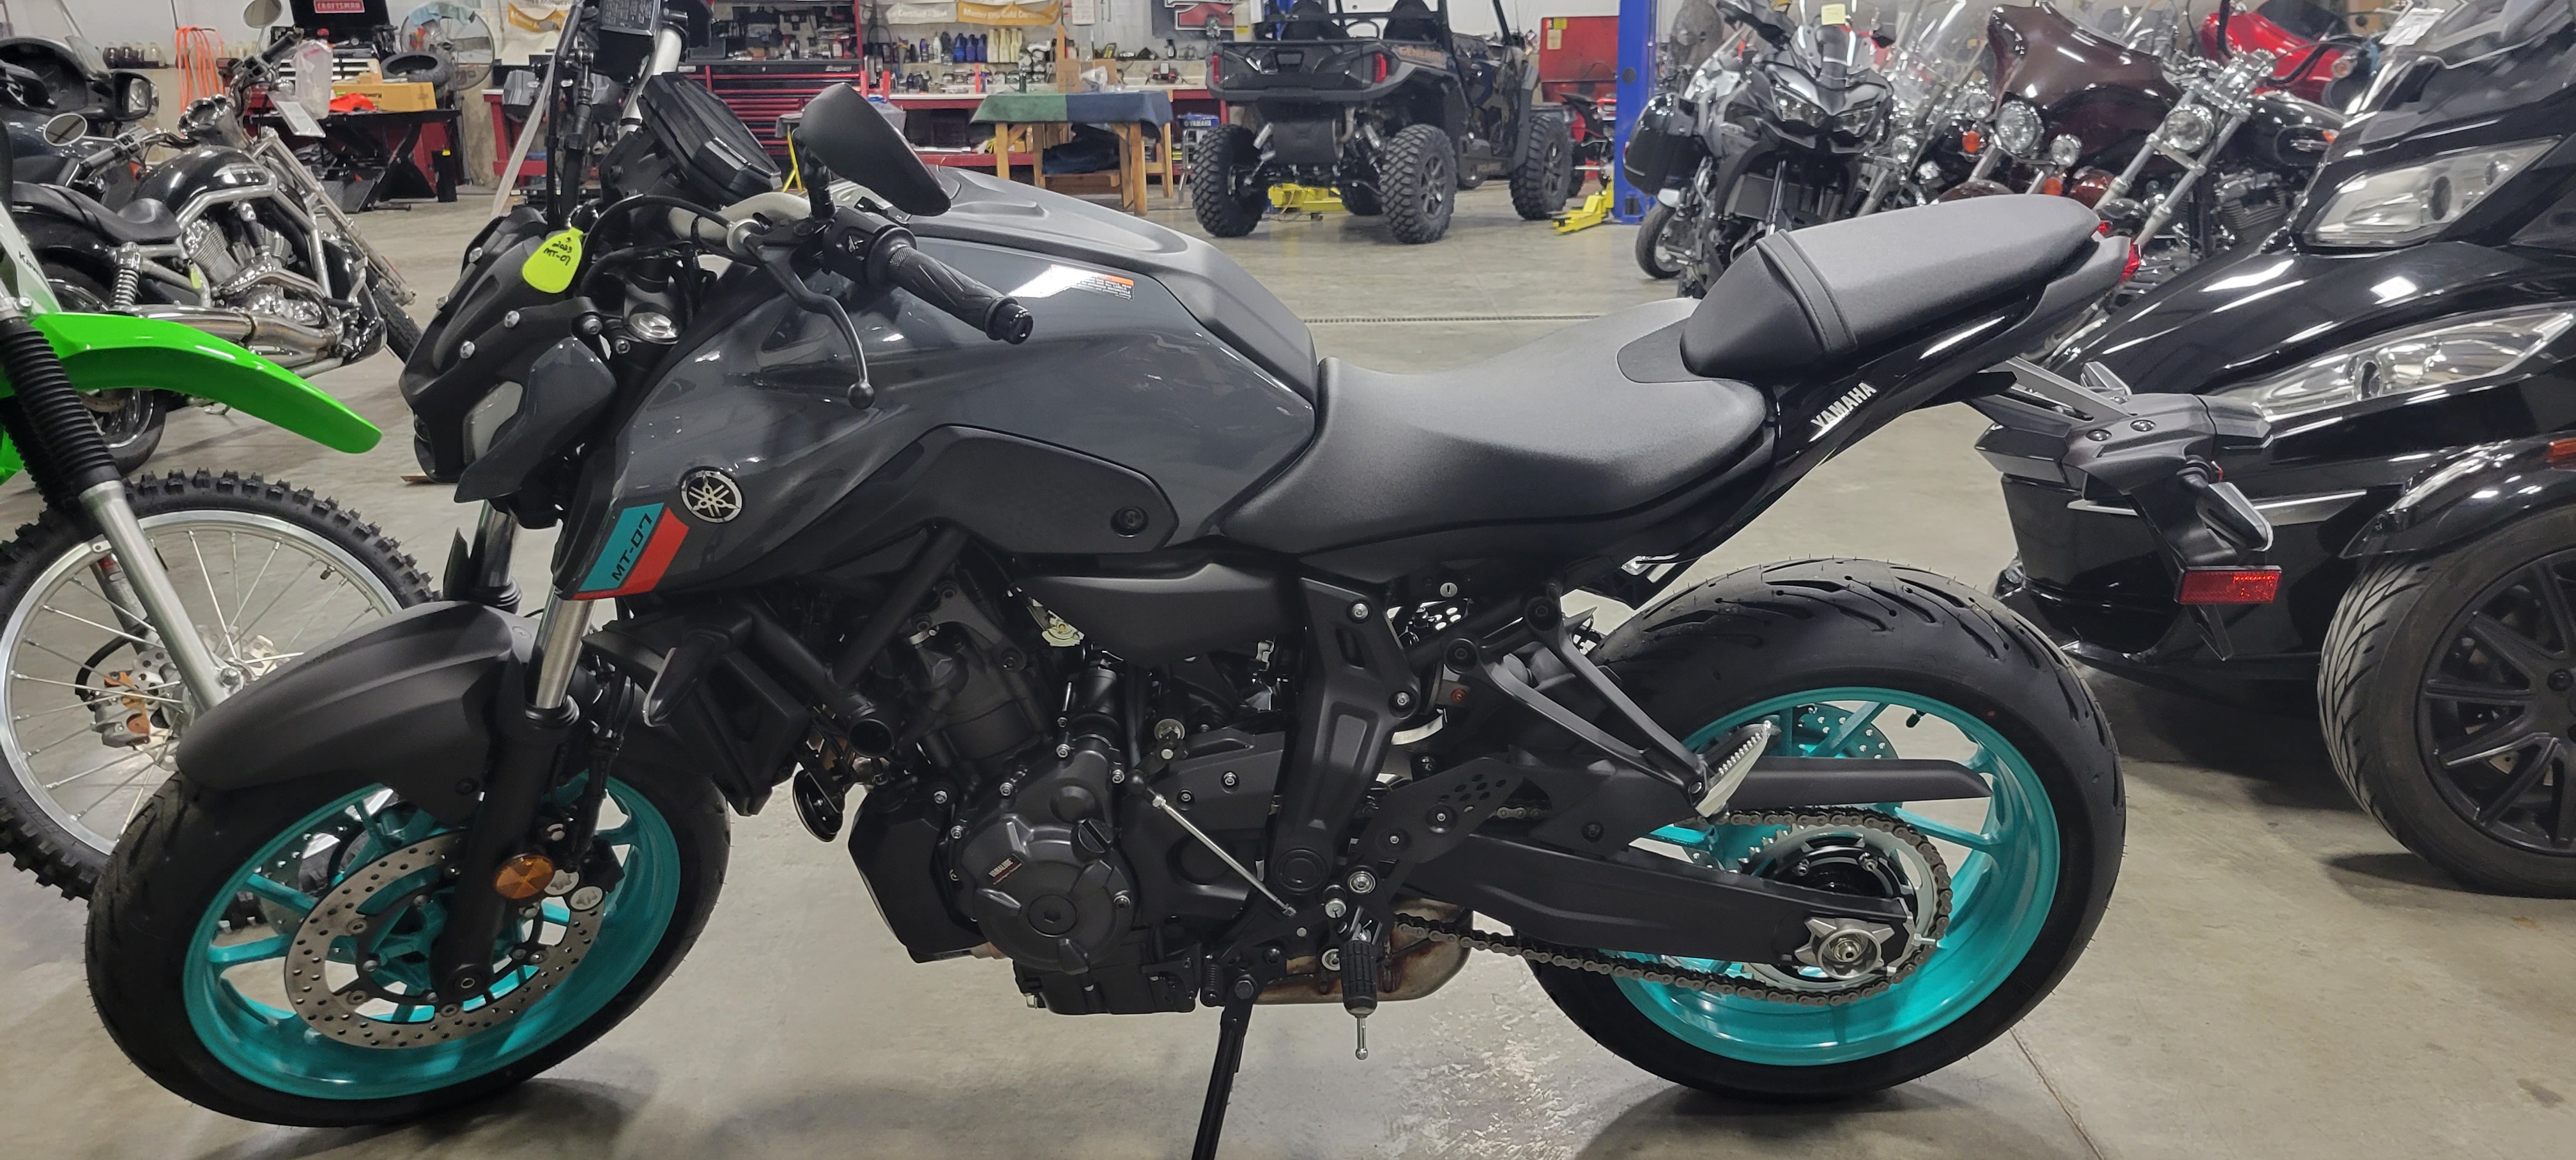 2022 Yamaha MT 07 at Brenny's Motorcycle Clinic, Bettendorf, IA 52722